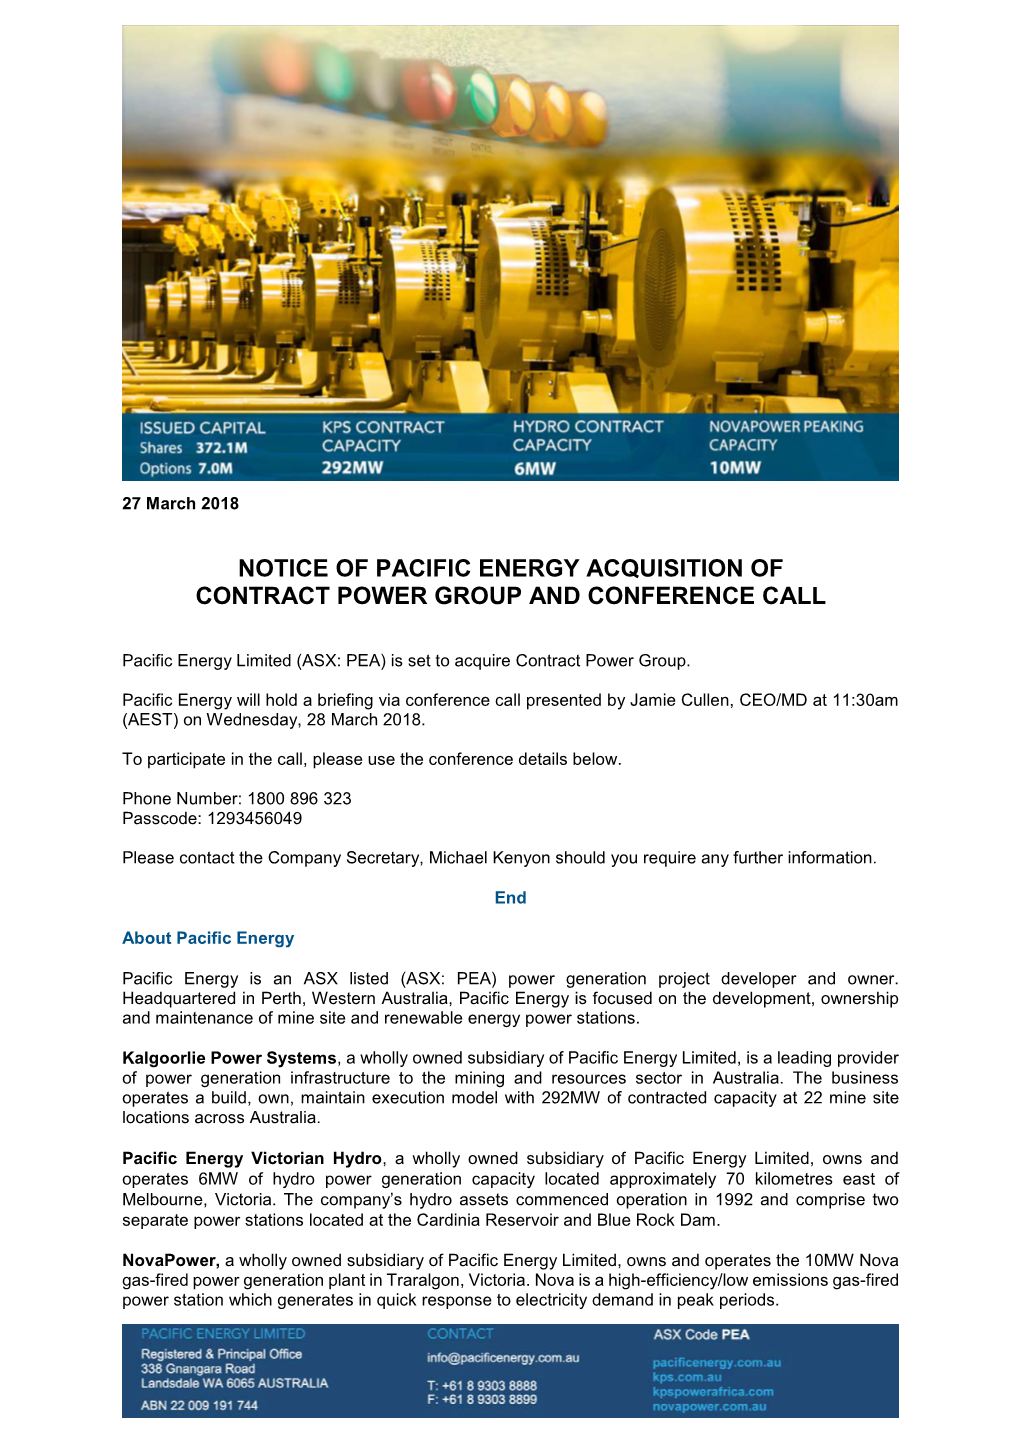 Notice of Pacific Energy Acquisition of Contract Power Group and Conference Call